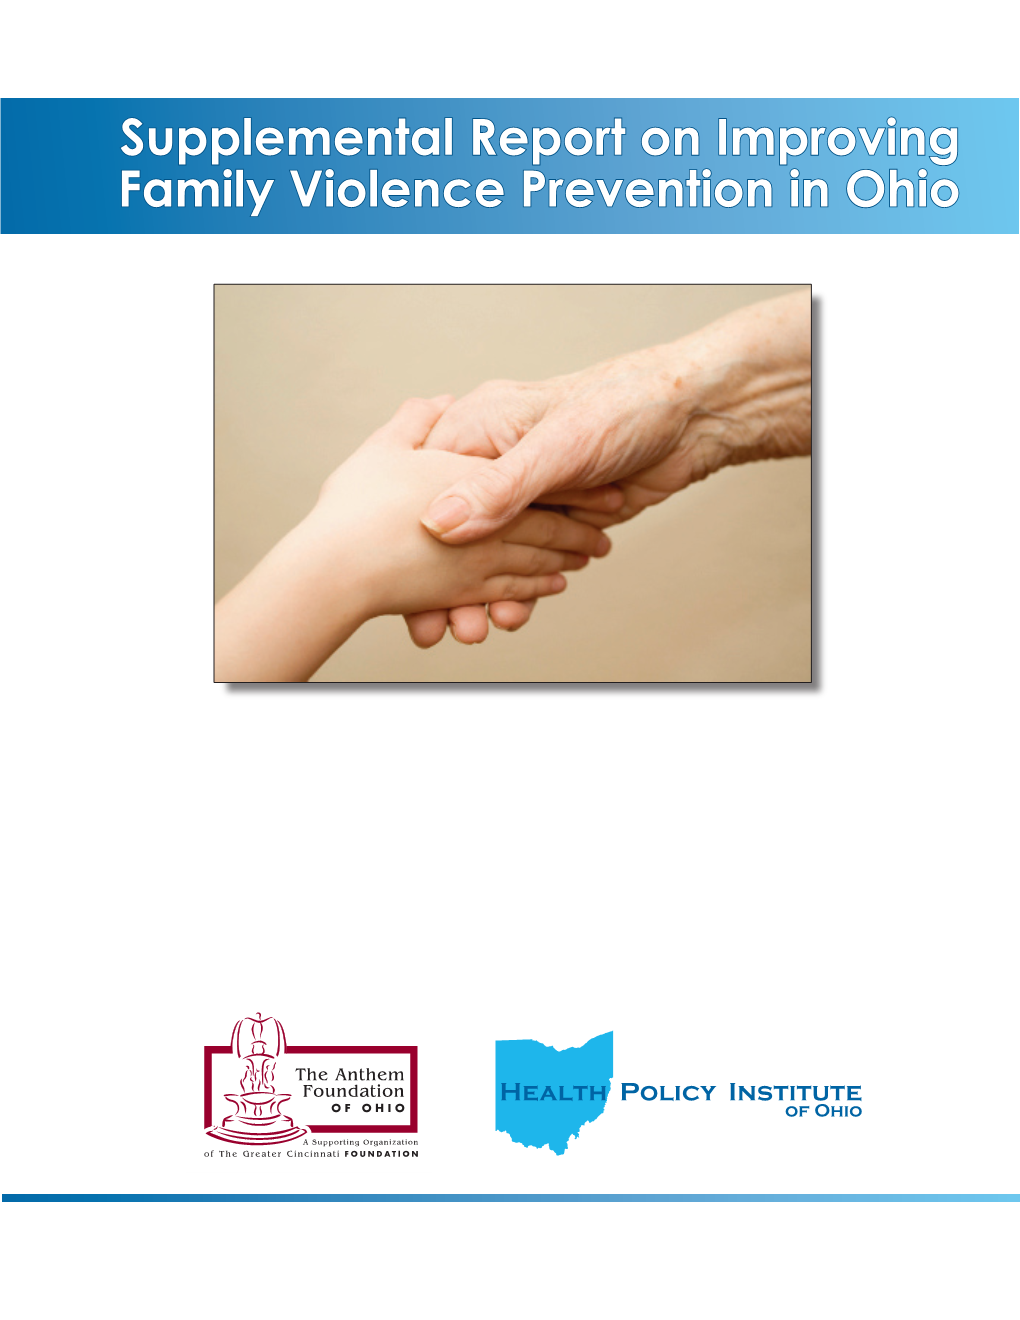 Supplemental Report on Improving Family Violence Prevention in Ohio